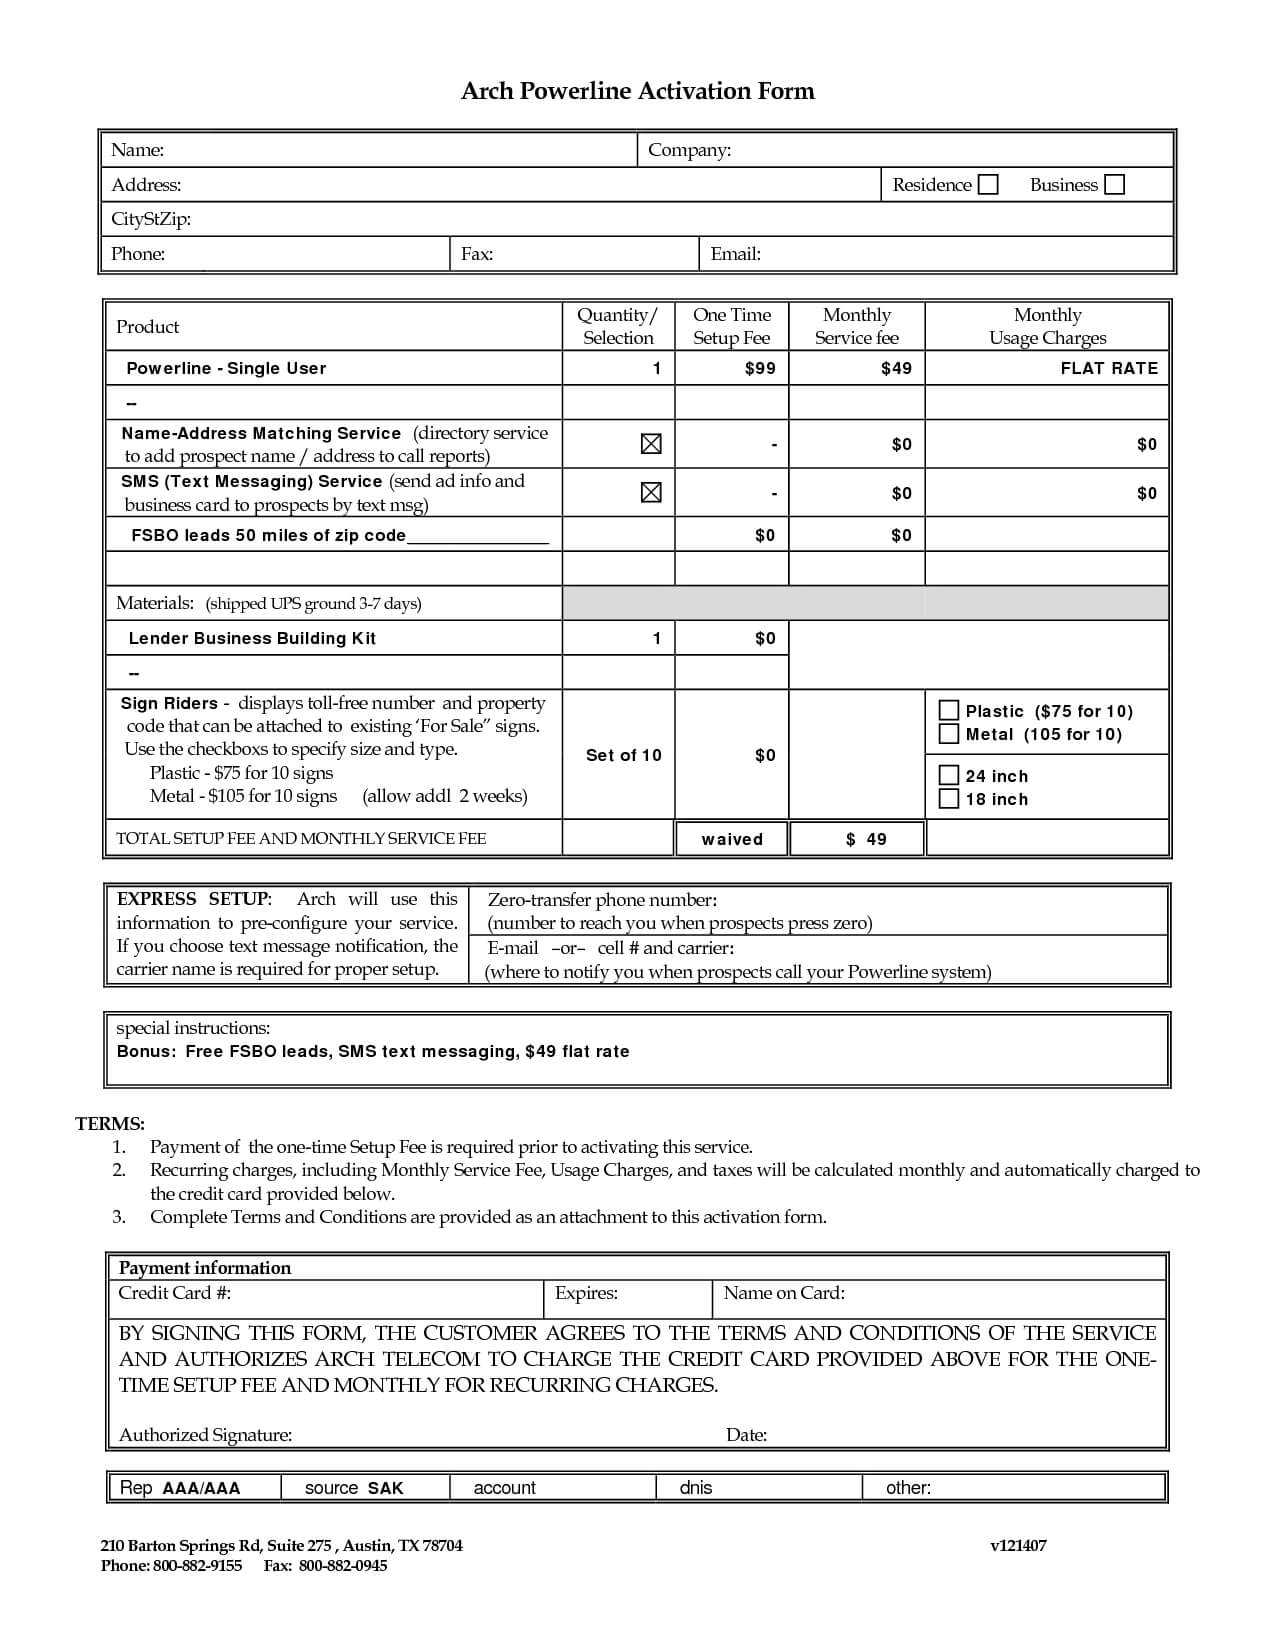 020 Sales Call Reporting Template Weekly Report 21554 For Sales Rep Call Report Template